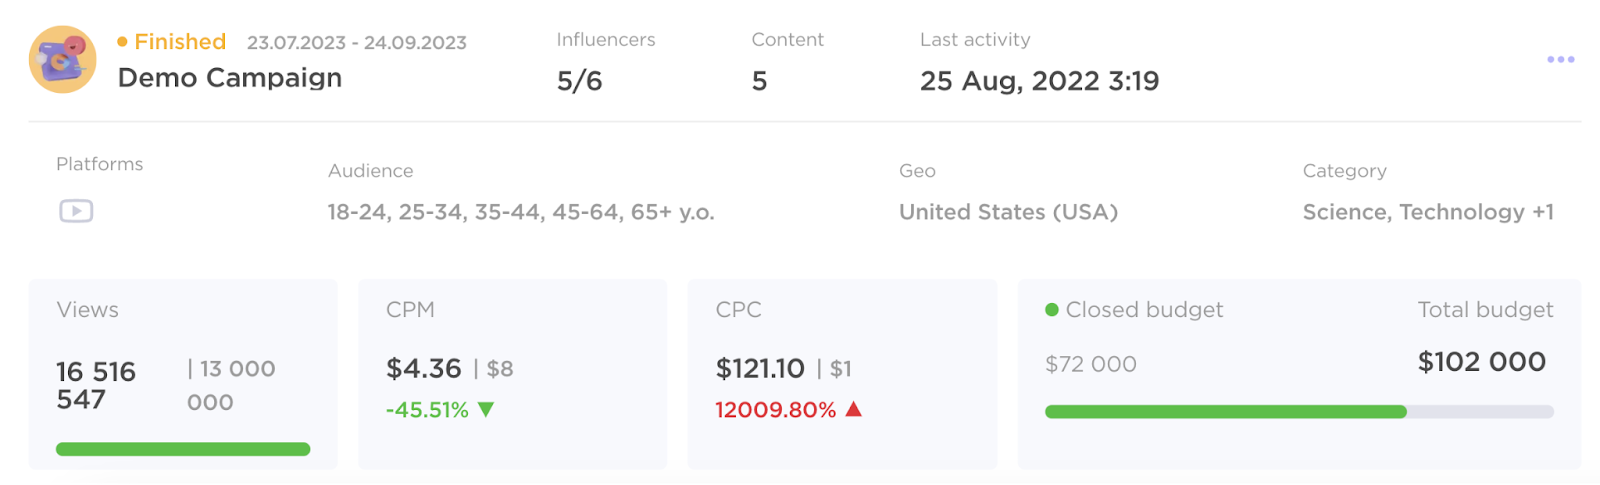 Demo Campaign dashboard in the Influencer Analytics tool